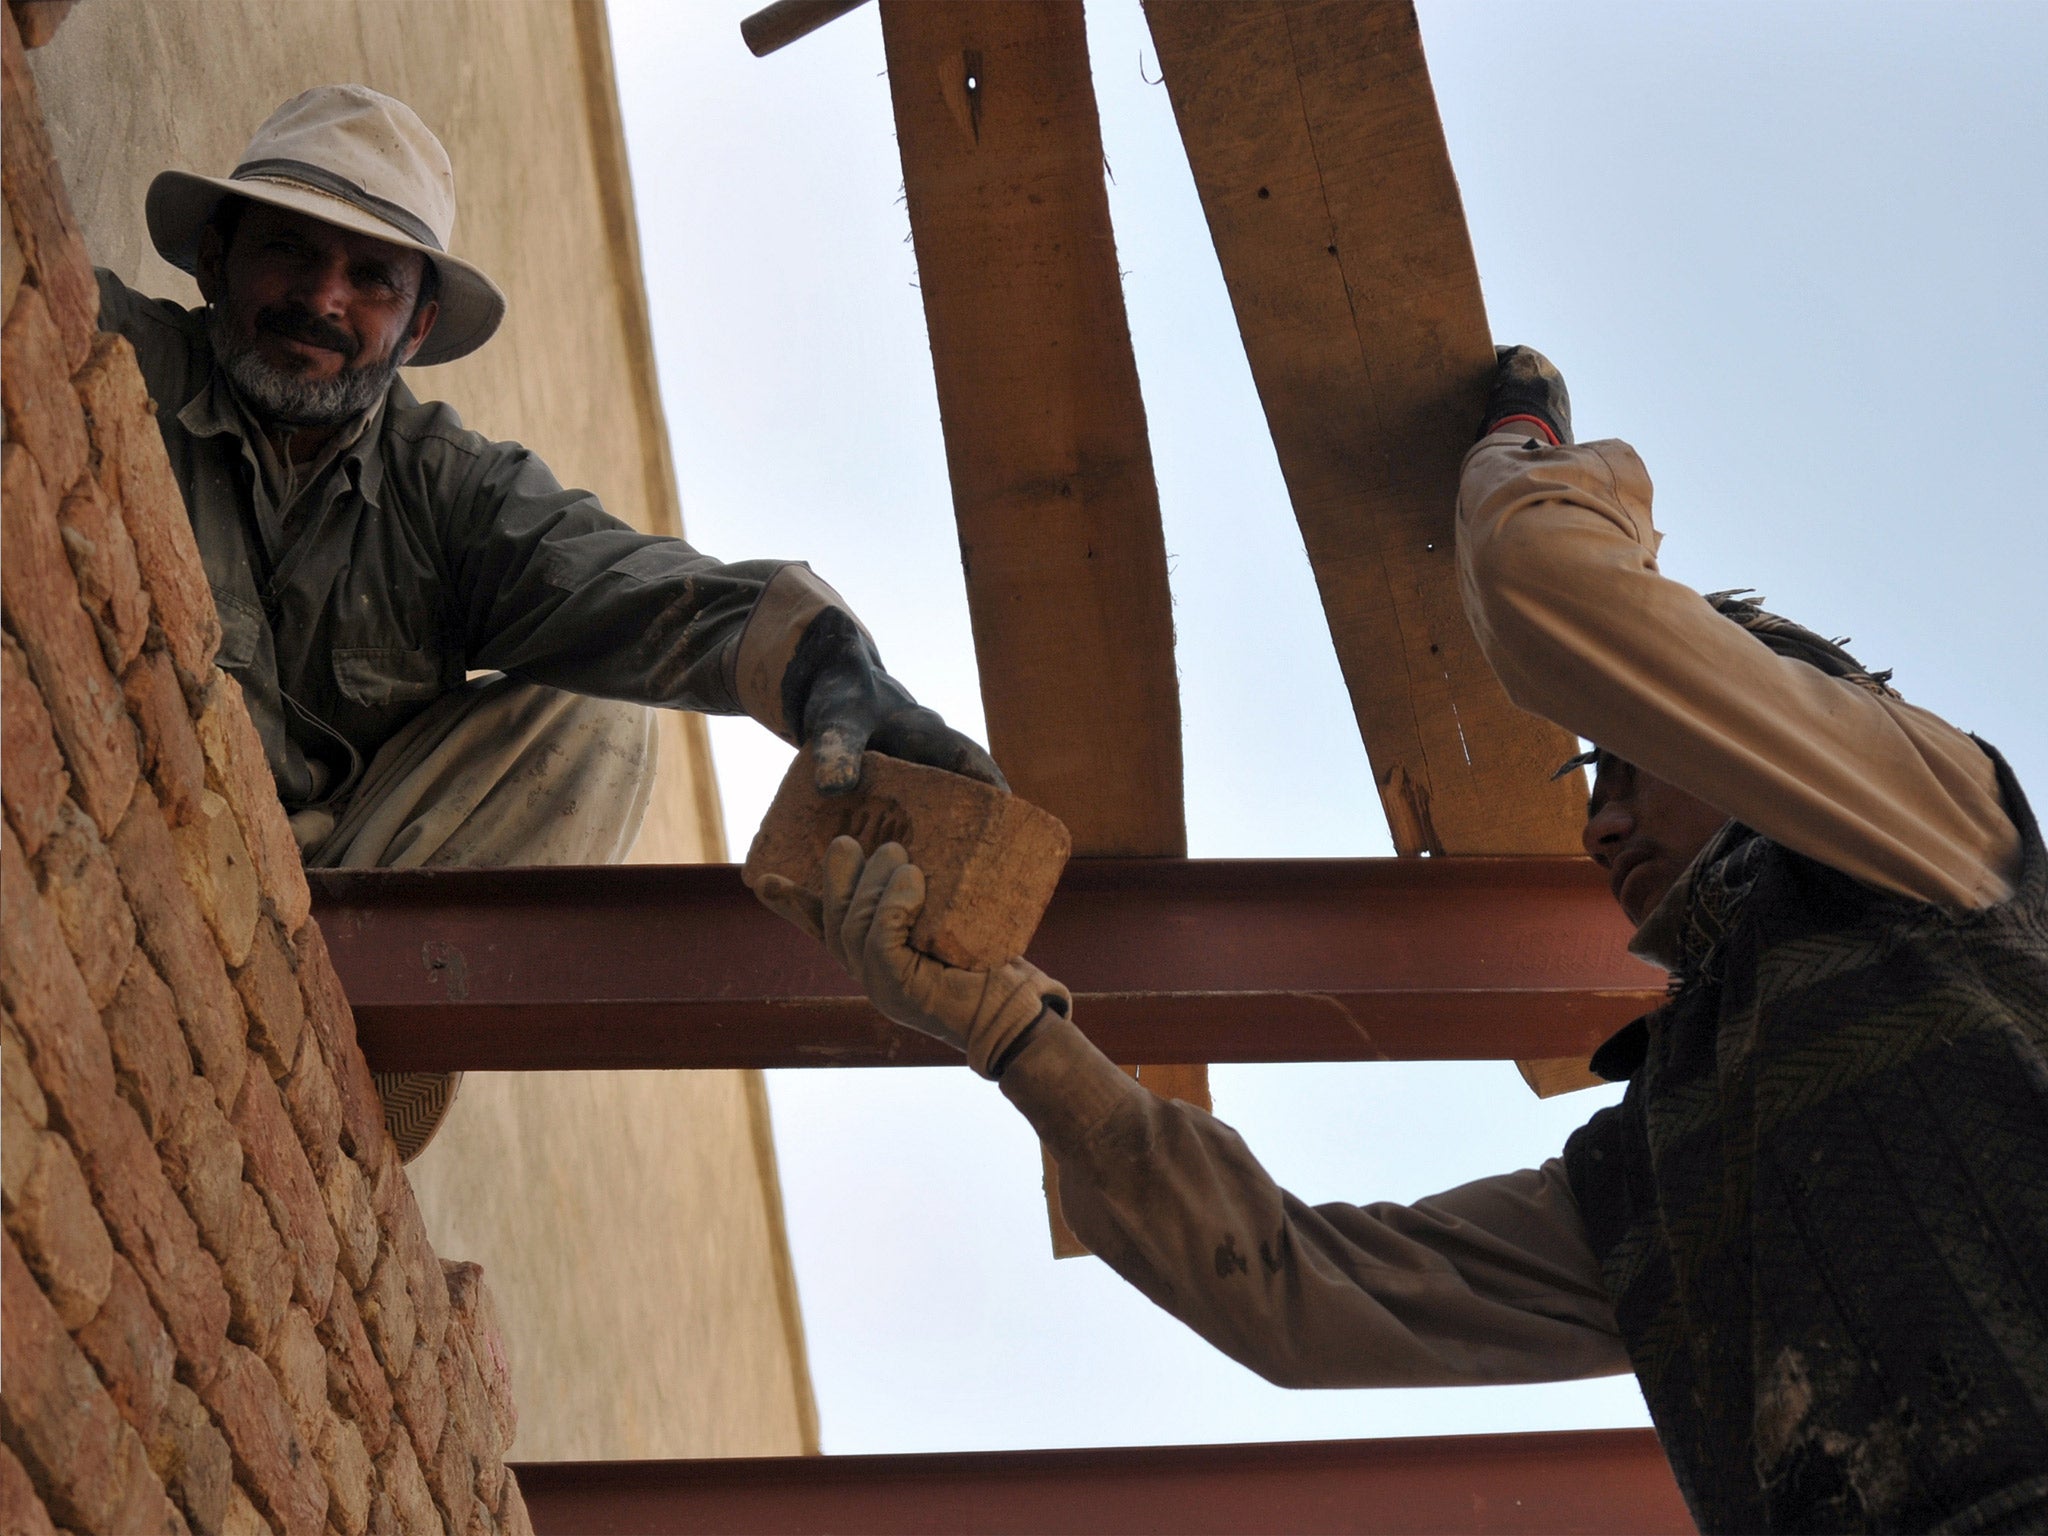 Contracts for Afghan reconstruction are not covered by Pentagon rules